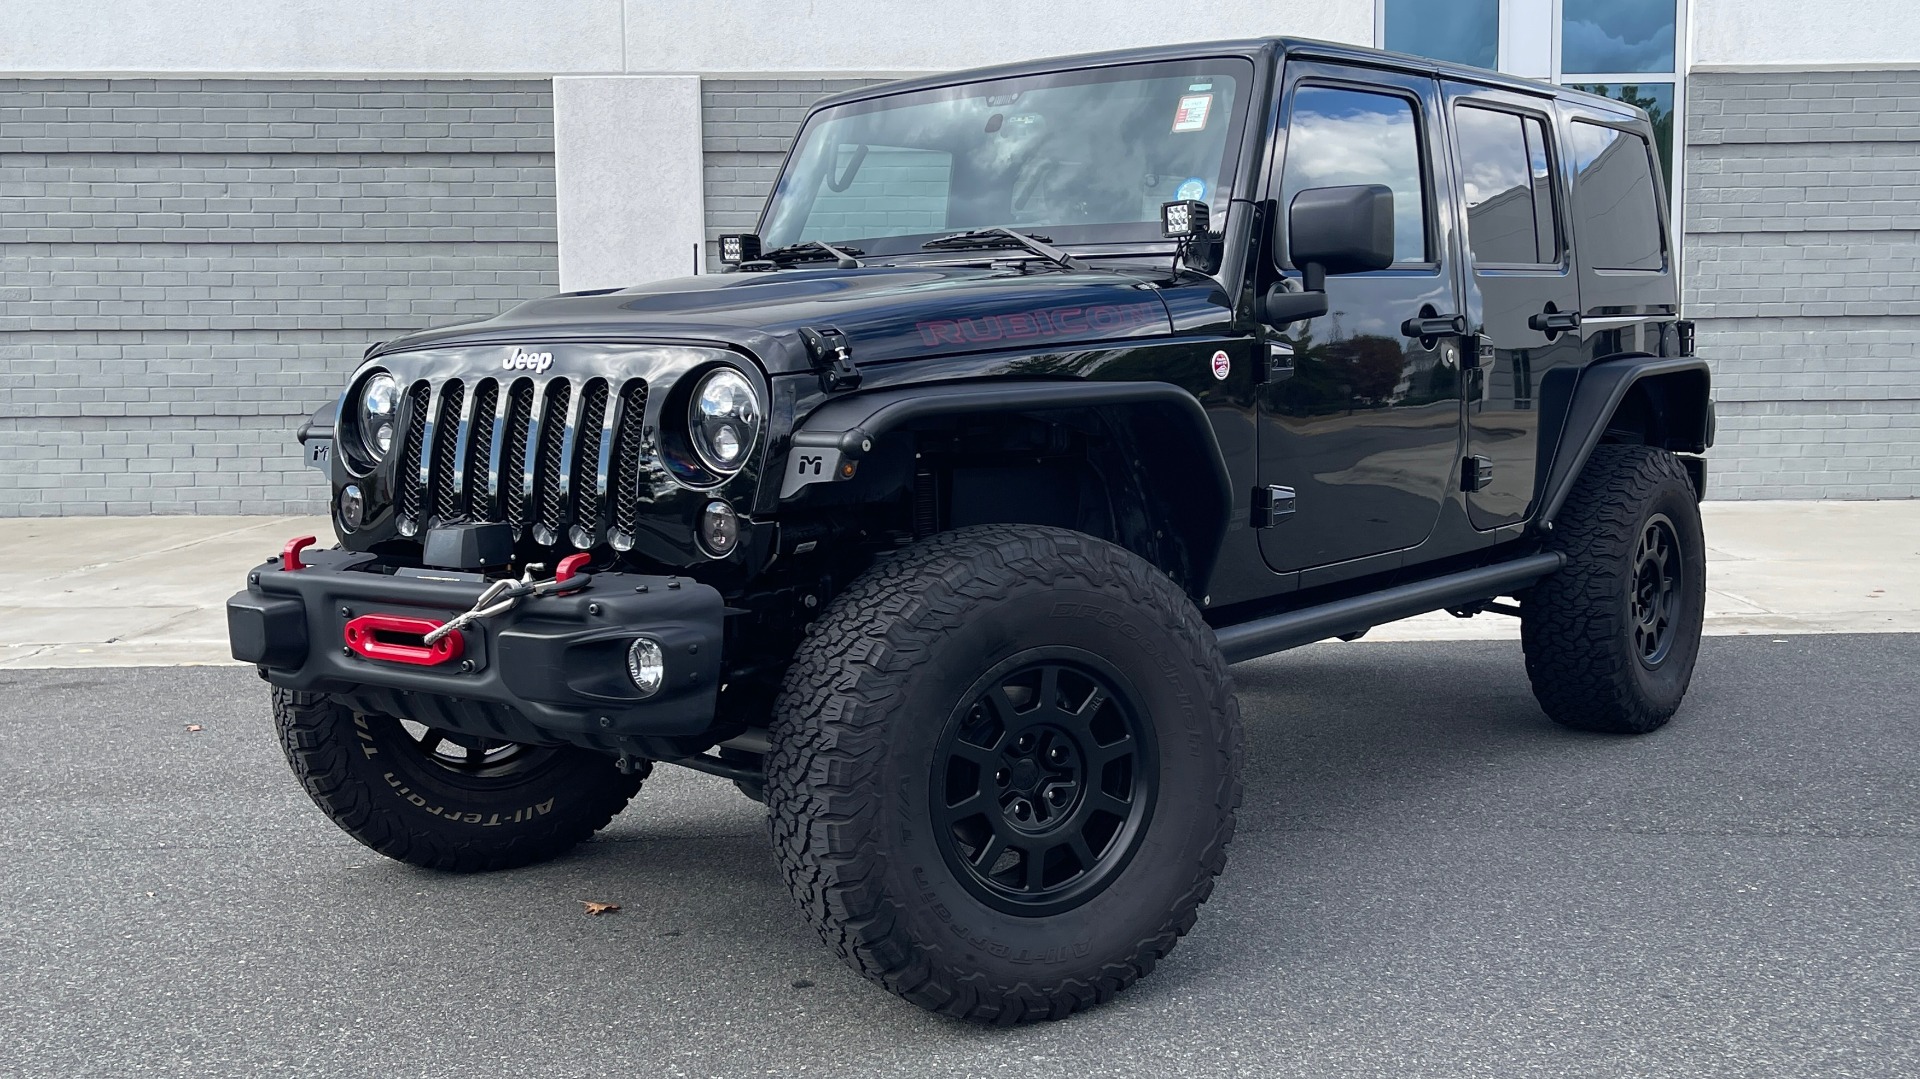 Used 2015 Jeep WRANGLER UNLIMITED RUBICON HARD ROCK 4X4 / 3.6L / 5-SPD AUTO / FREEDOM TOP for sale Sold at Formula Imports in Charlotte NC 28227 1